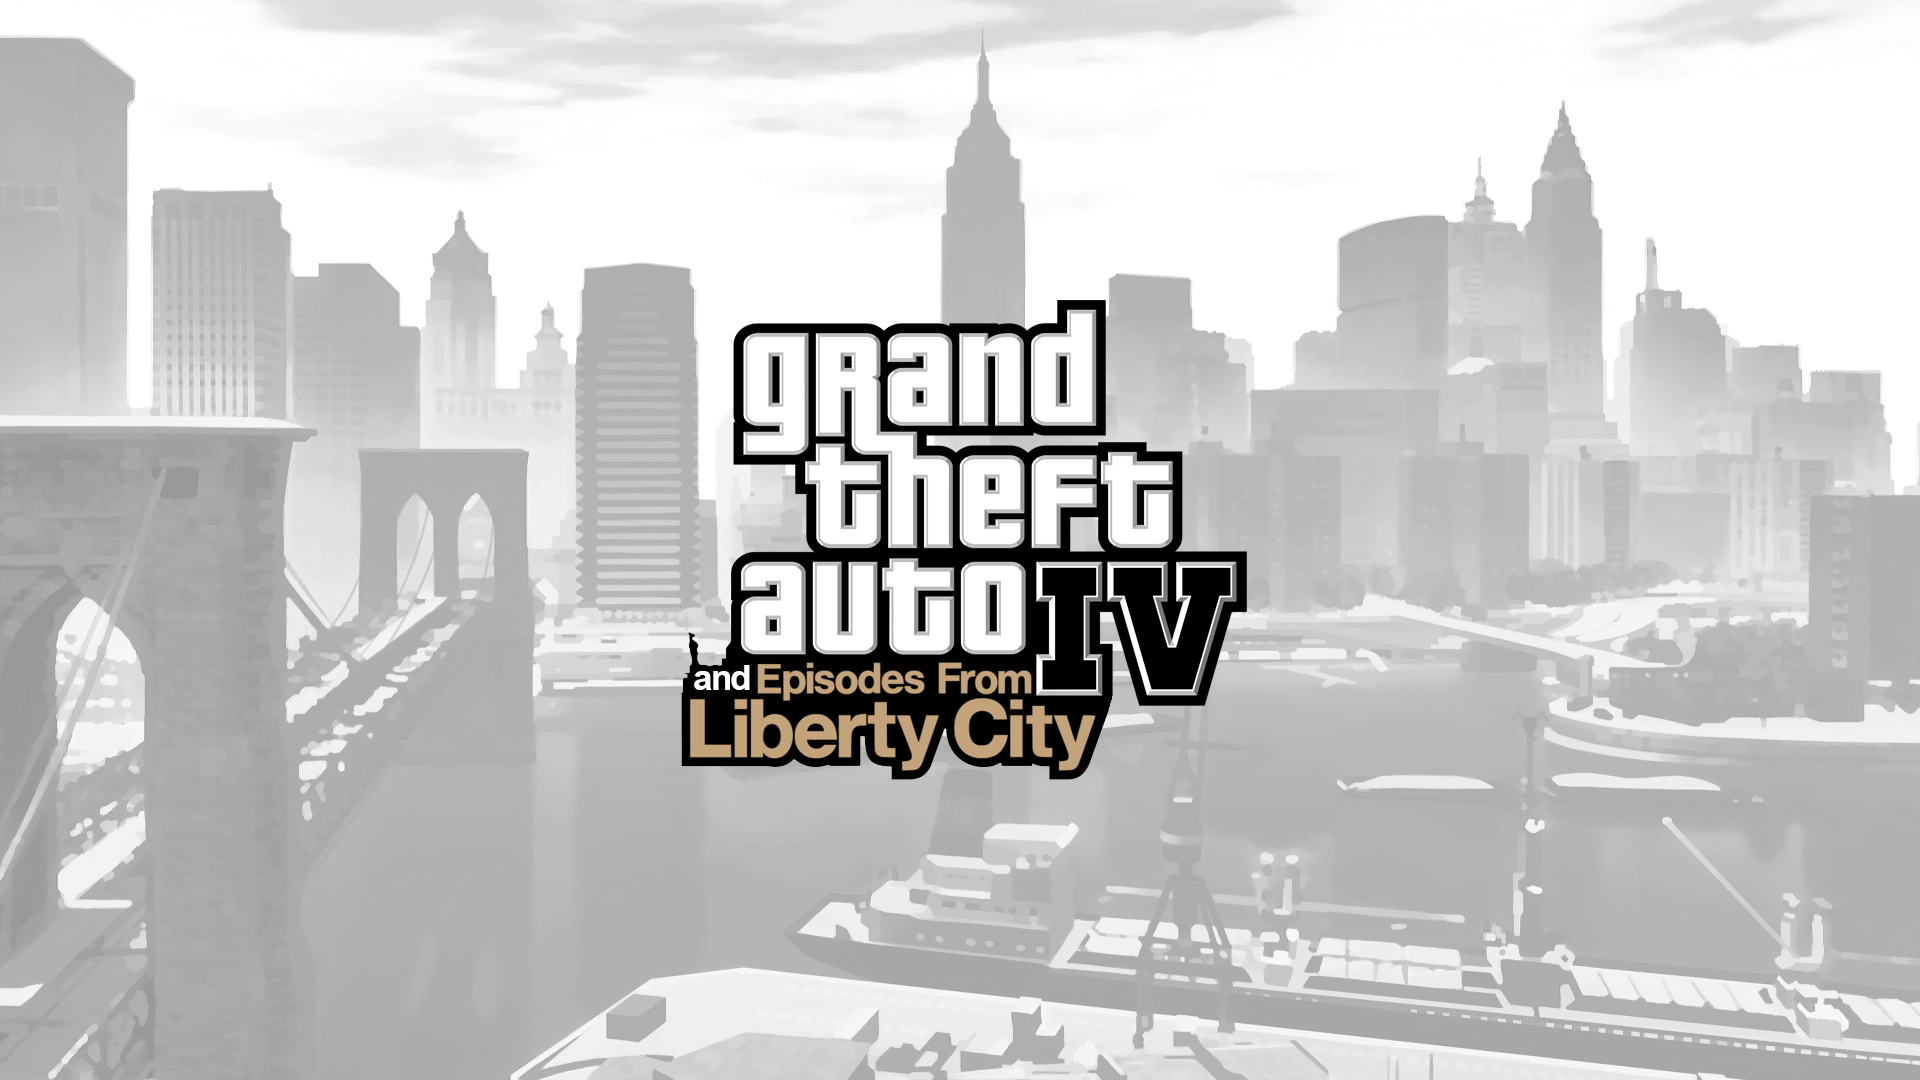 Grand Theft Auto IV & Episodes from Liberty City for PC Review.